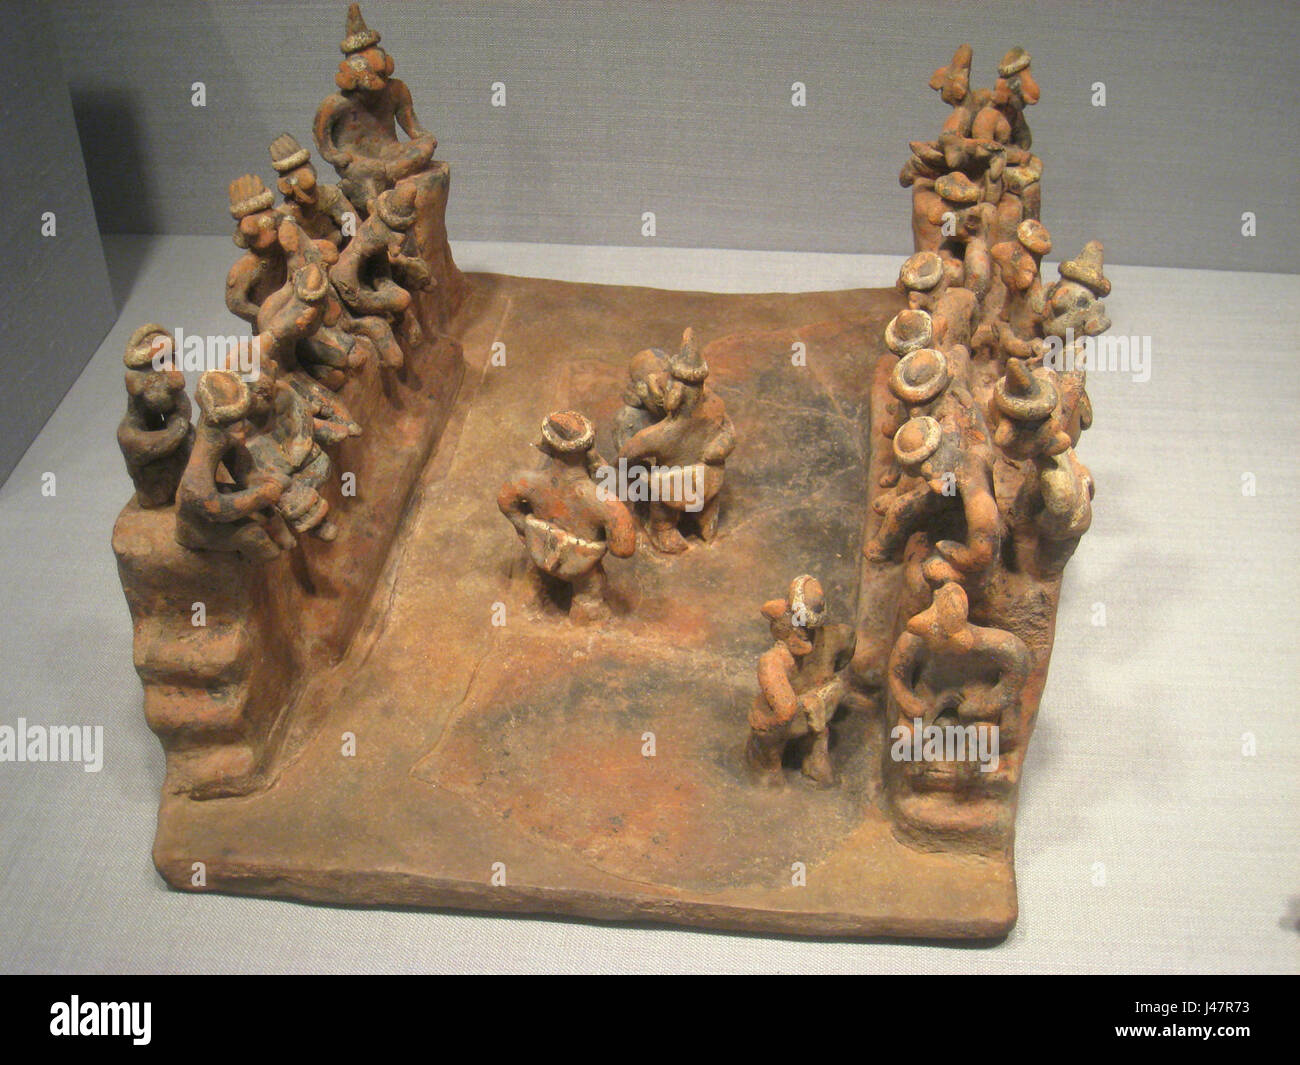 Model of Ball Game Scene, Mexico, State of Nayarit, 200 BC   500 AD, ceramic, Pre Columbian collection, Worcester Art Museum   IMG 7667 Stock Photo